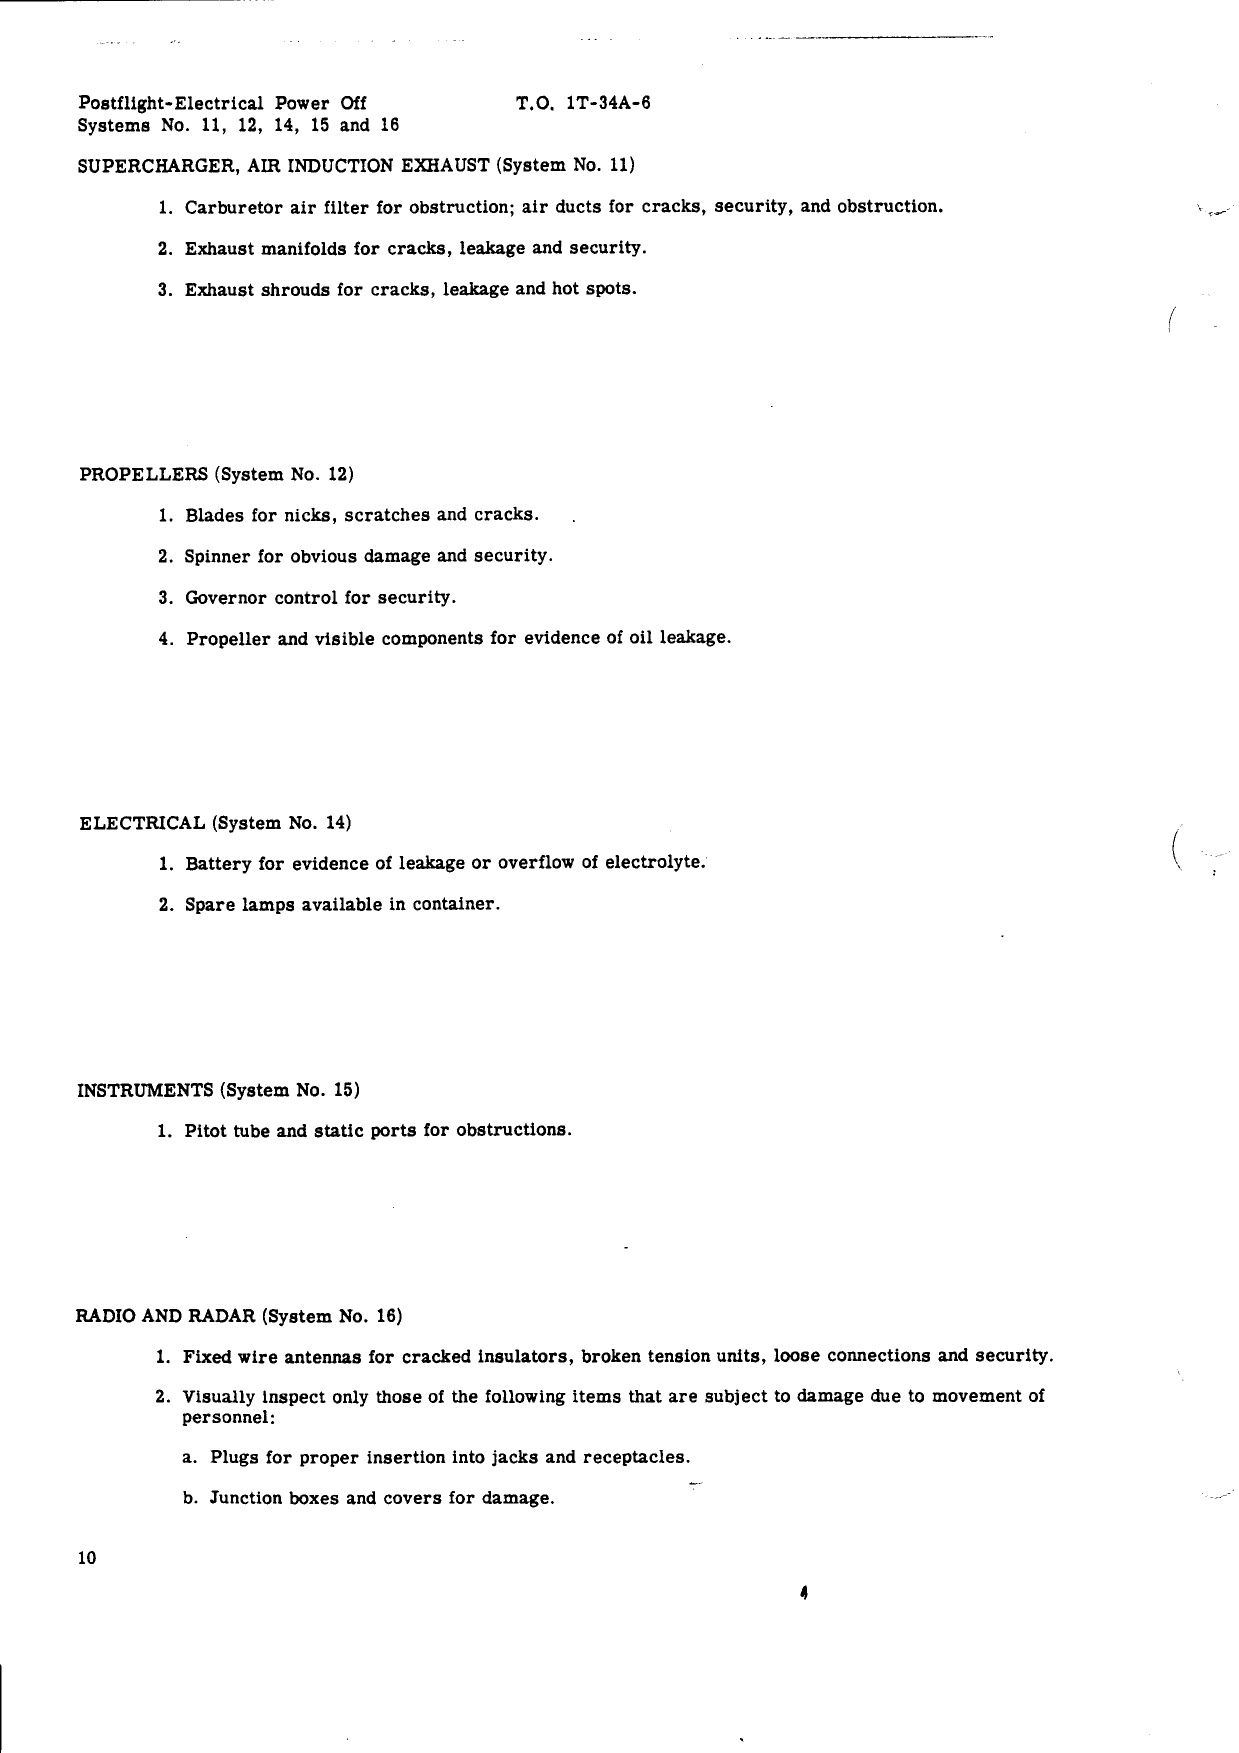 Sample page 14 from AirCorps Library document: Handbook Inspection Requirements for USAF Series T-34A Aircraft